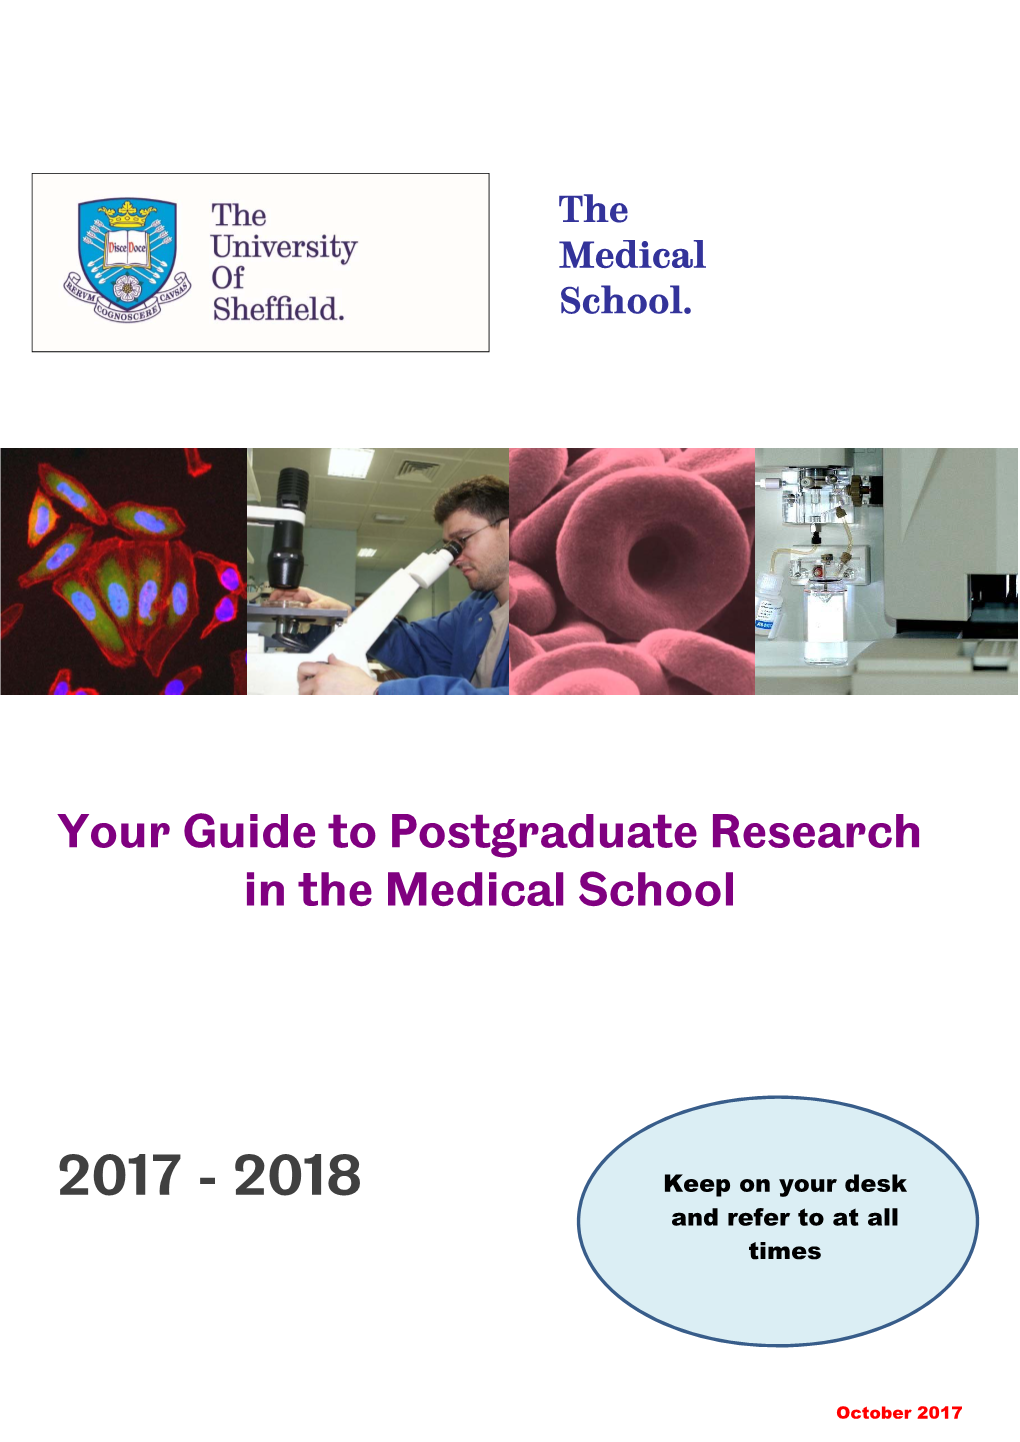 Your Guide to Postgraduate Research in the Medical School